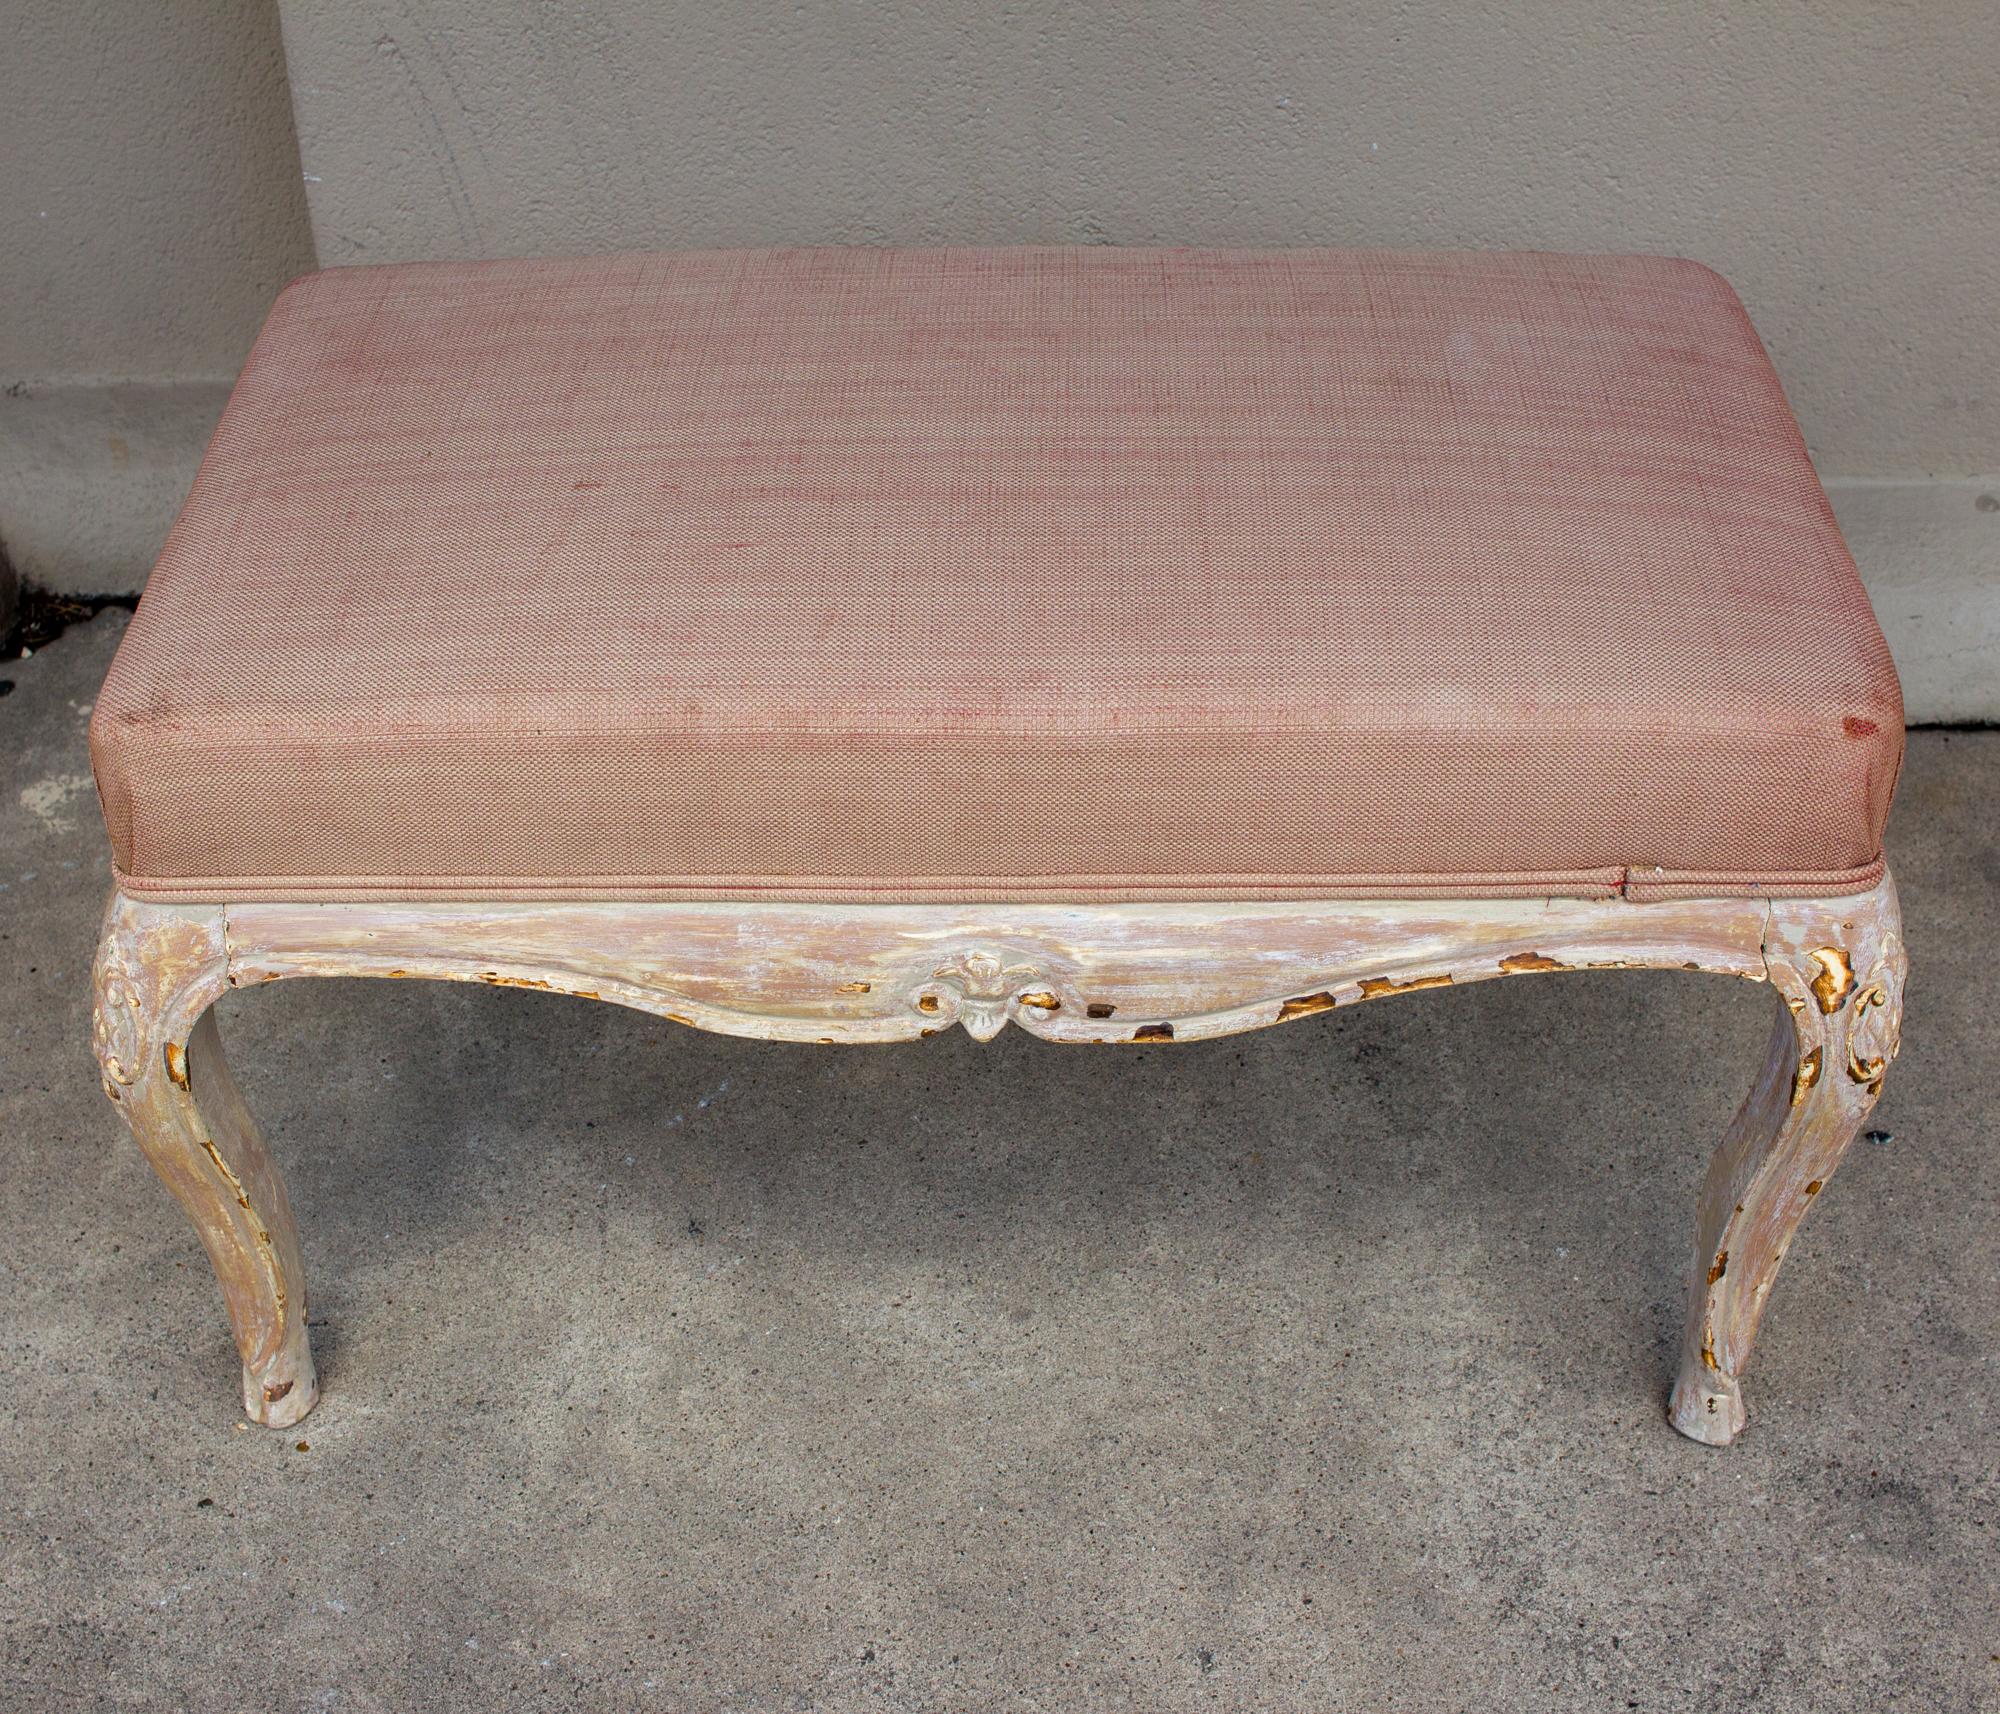 Antique French Carved Bench with Distressed Painted Finish, circa 1820 3